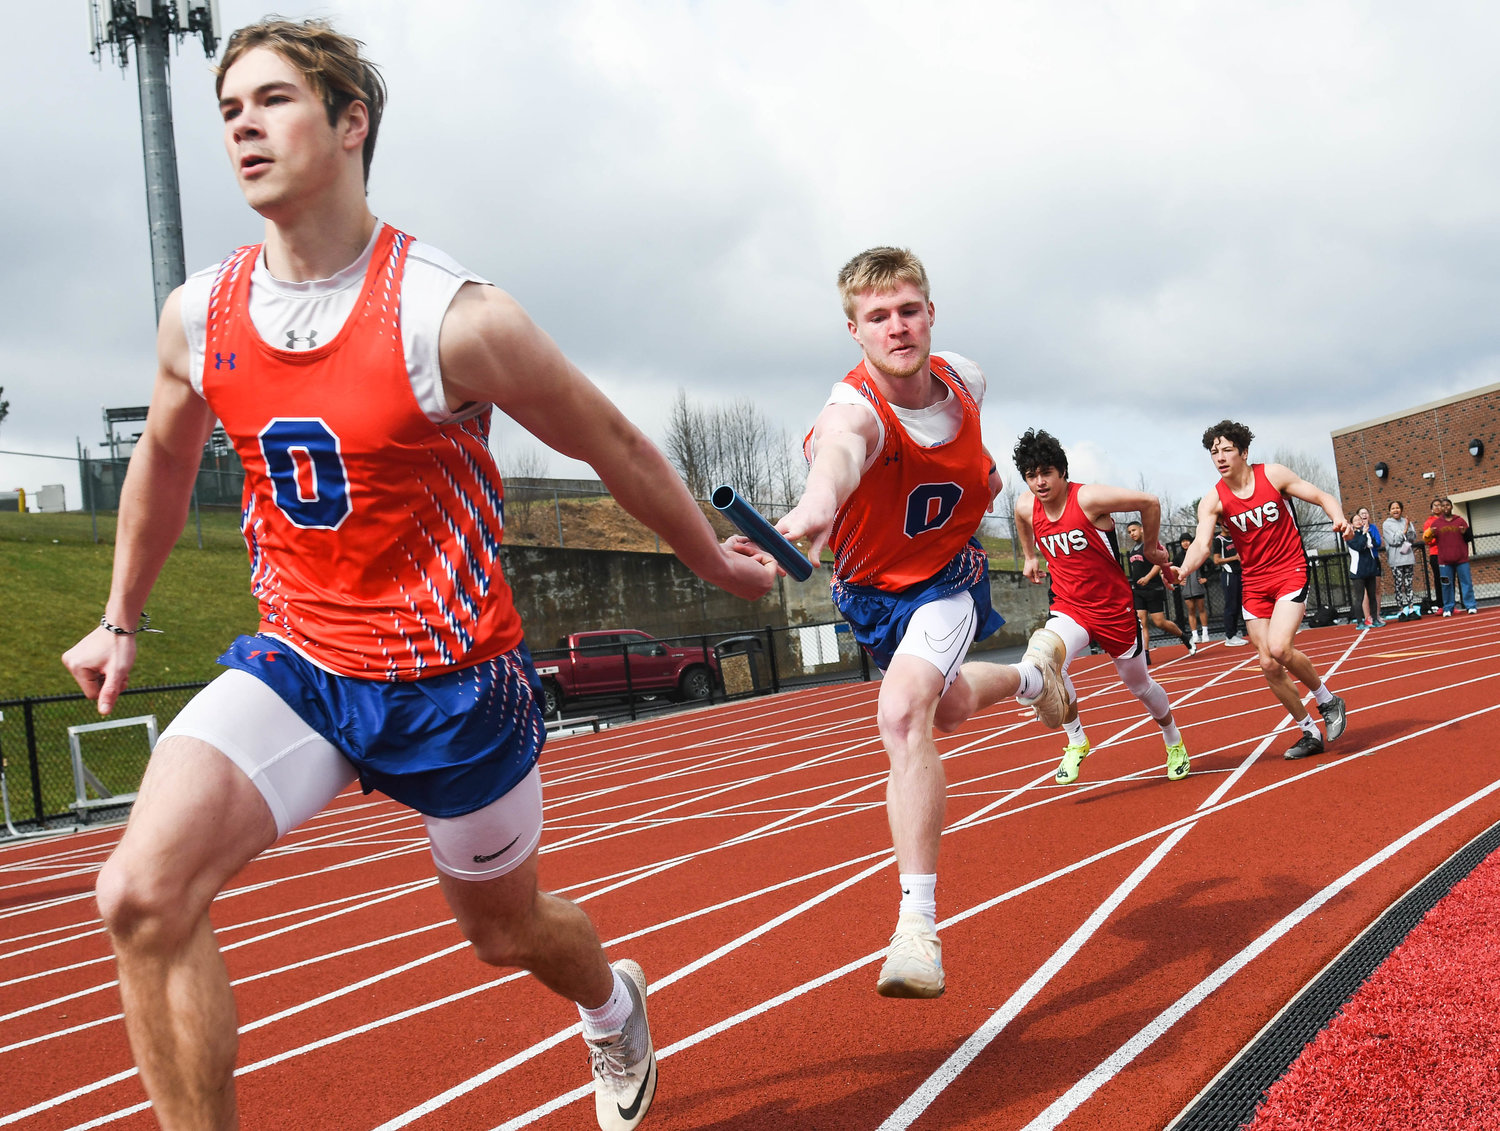 From left, Oneida runner Ryan Wuest receives the baton from teammate Avery Baker during a 4 by 100 meter relay on Tuesday.